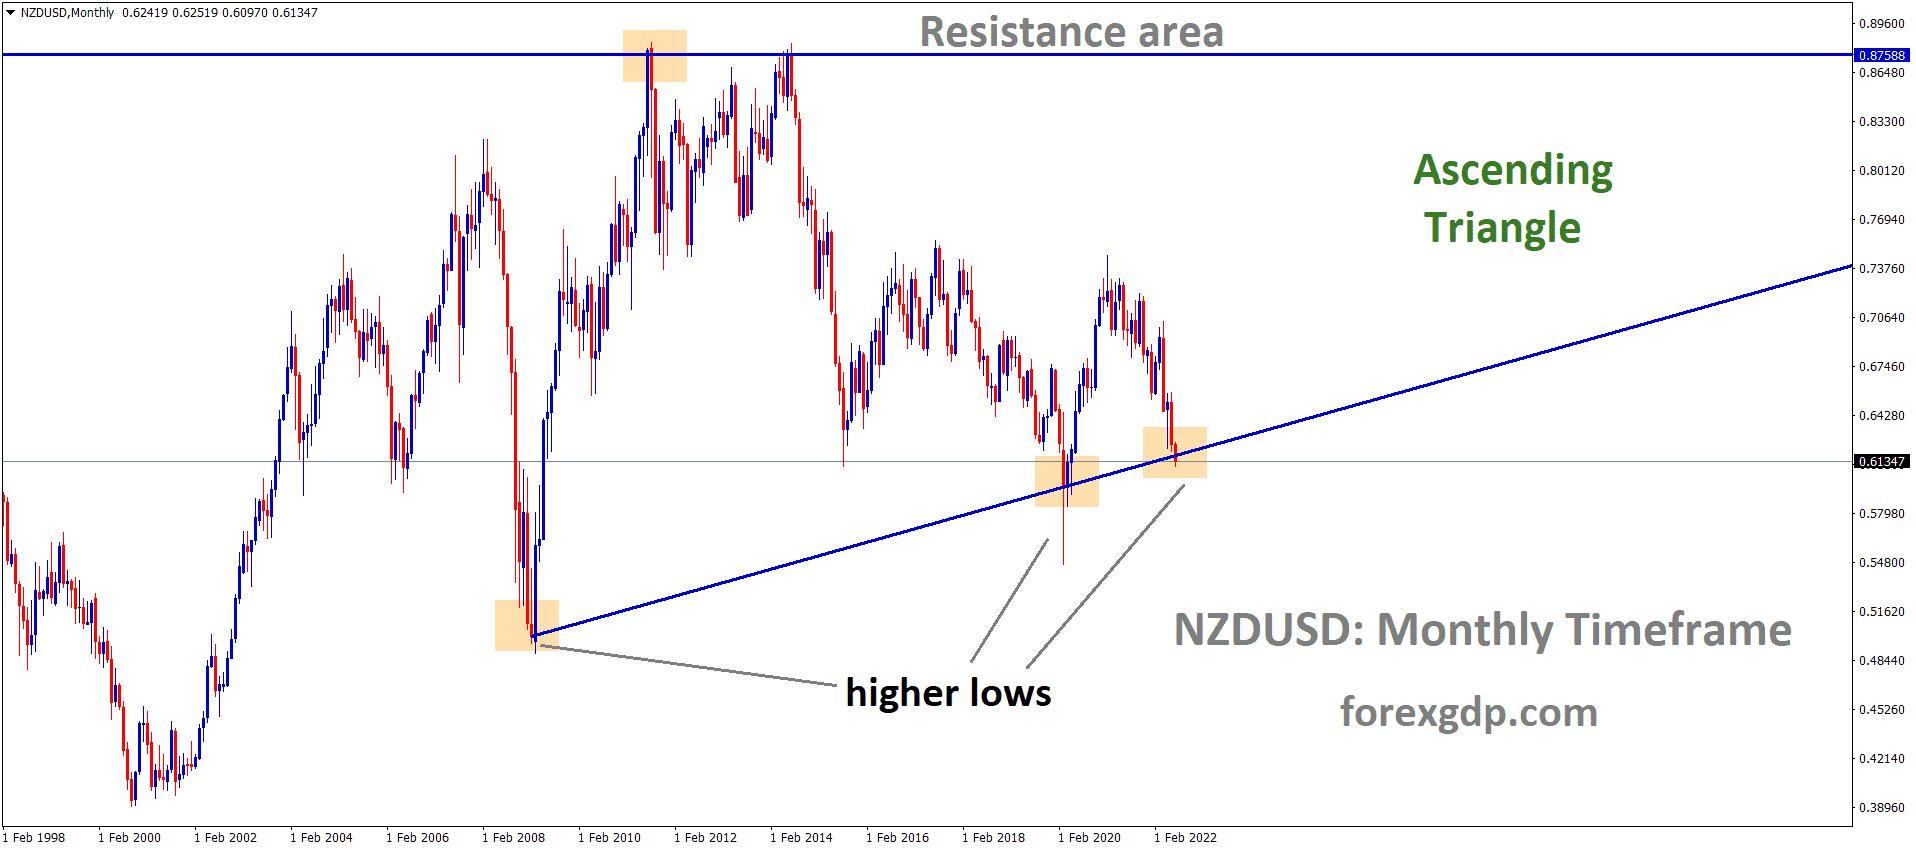 NZDUSD Monthly TF analysis Market is moving in an Ascending triangle pattern and the Market has reached the higher low area of the triangle pattern